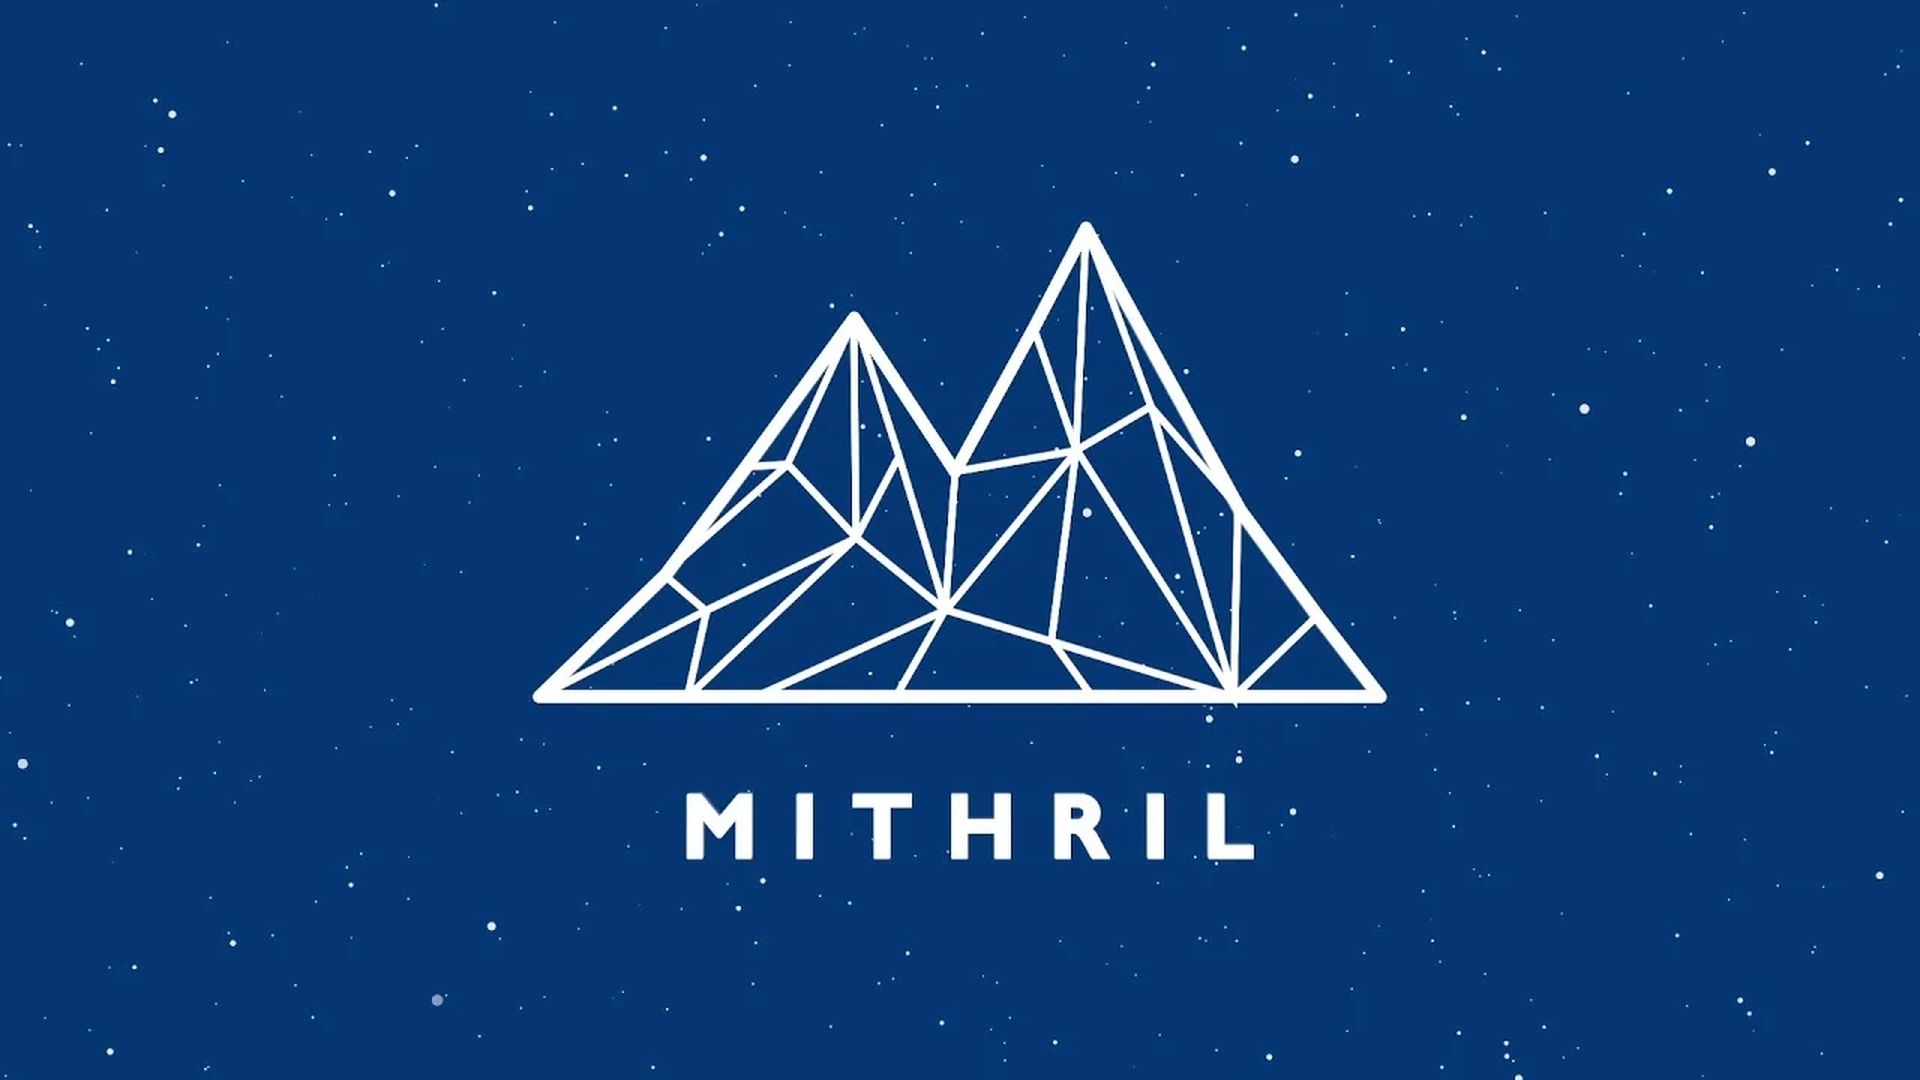 Today, we are going over what is Mithril Crypto and answering questions, such as: 'Is Mithril crypto a good investment?" and "How do I invest in Mithril?"